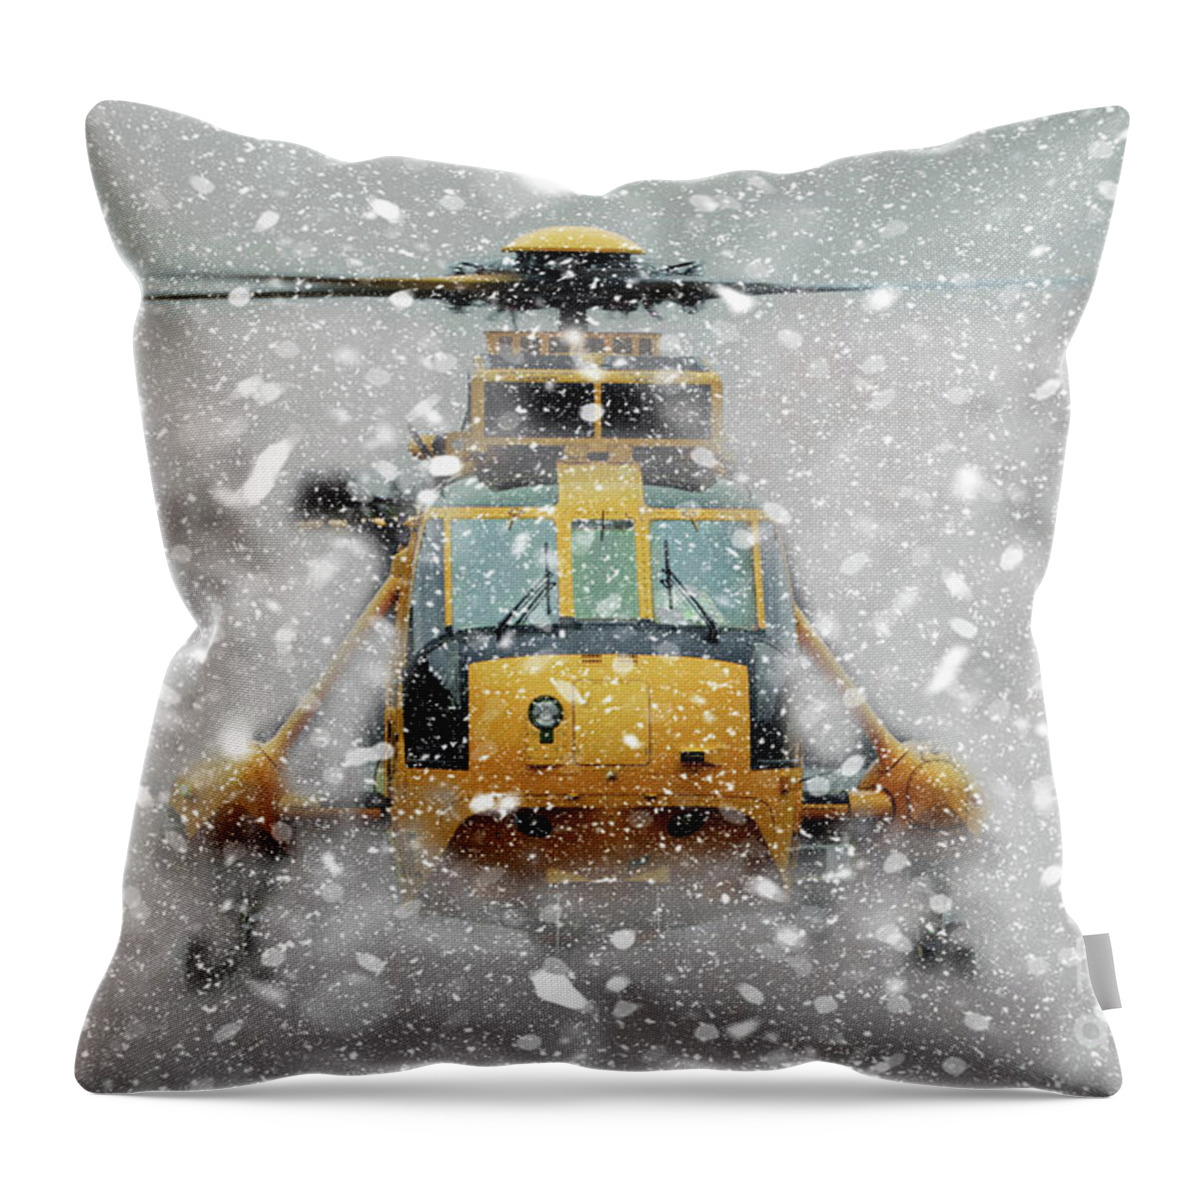 Sikorsky Throw Pillow featuring the digital art Sea King Snow by Airpower Art